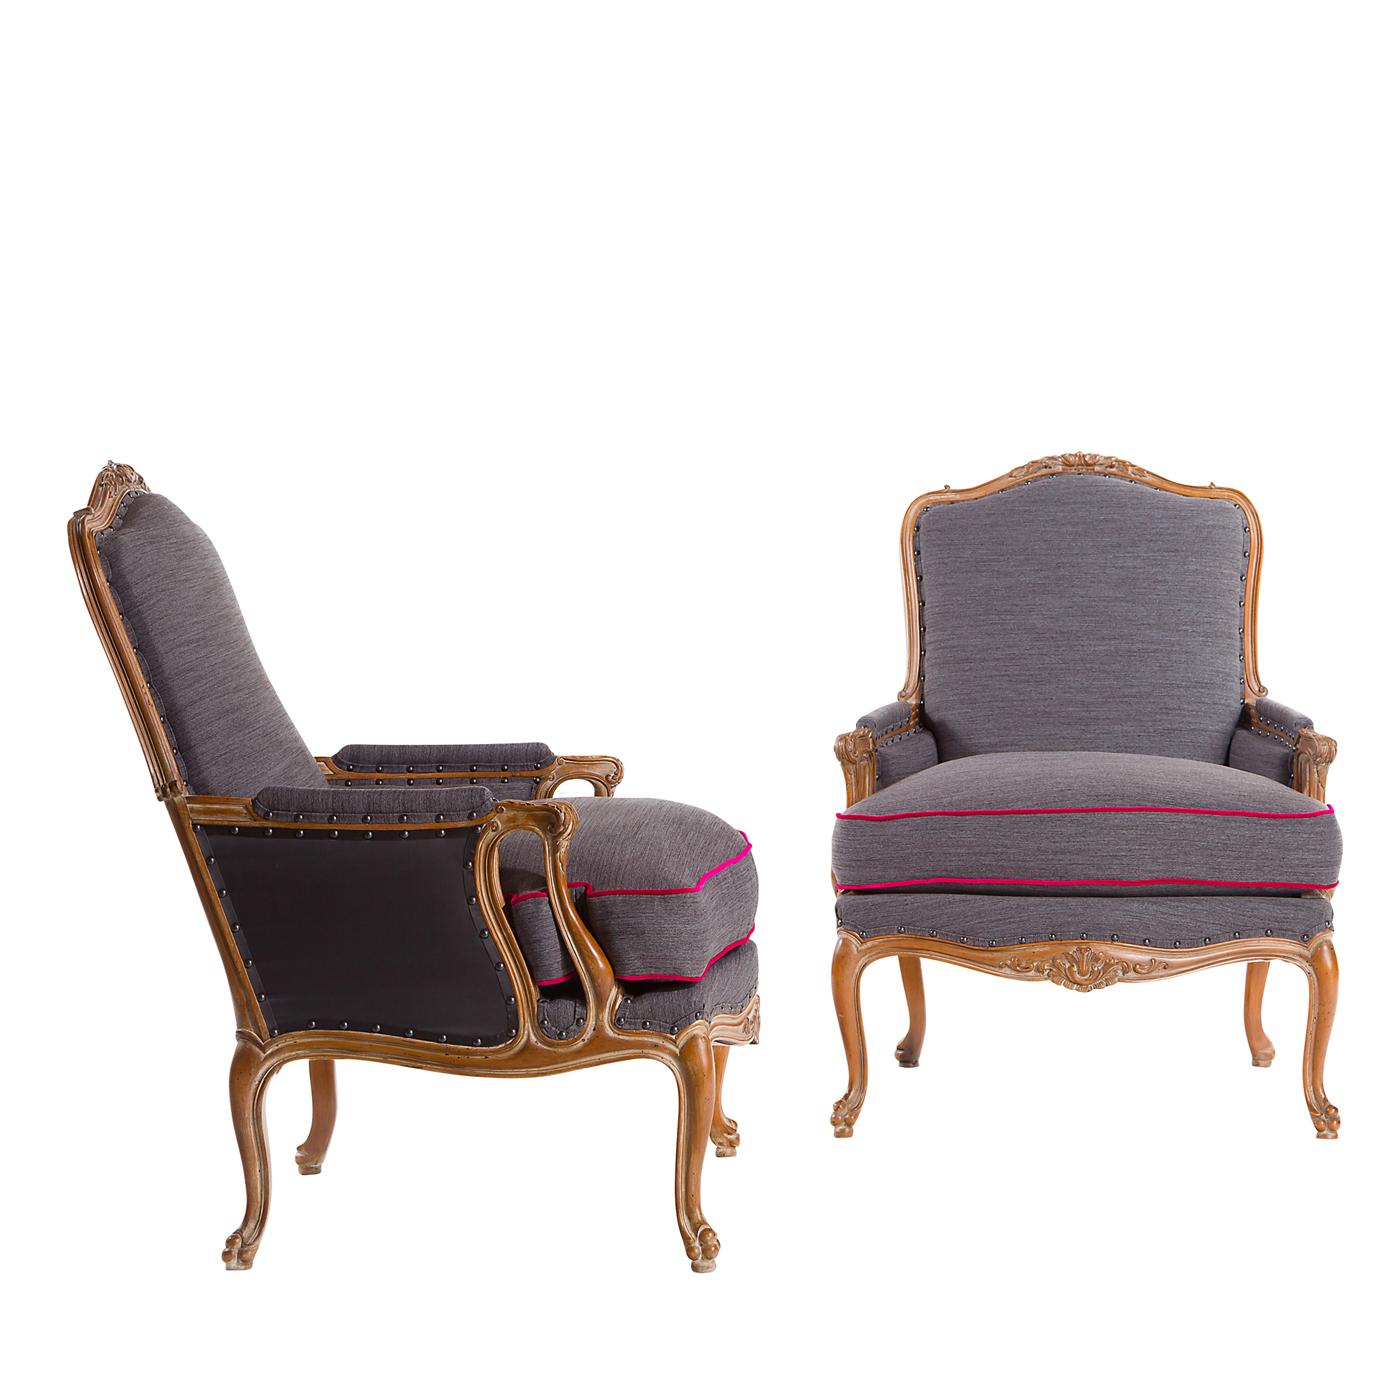 Bergére Louis XV with handmade carvings, upholstered.




